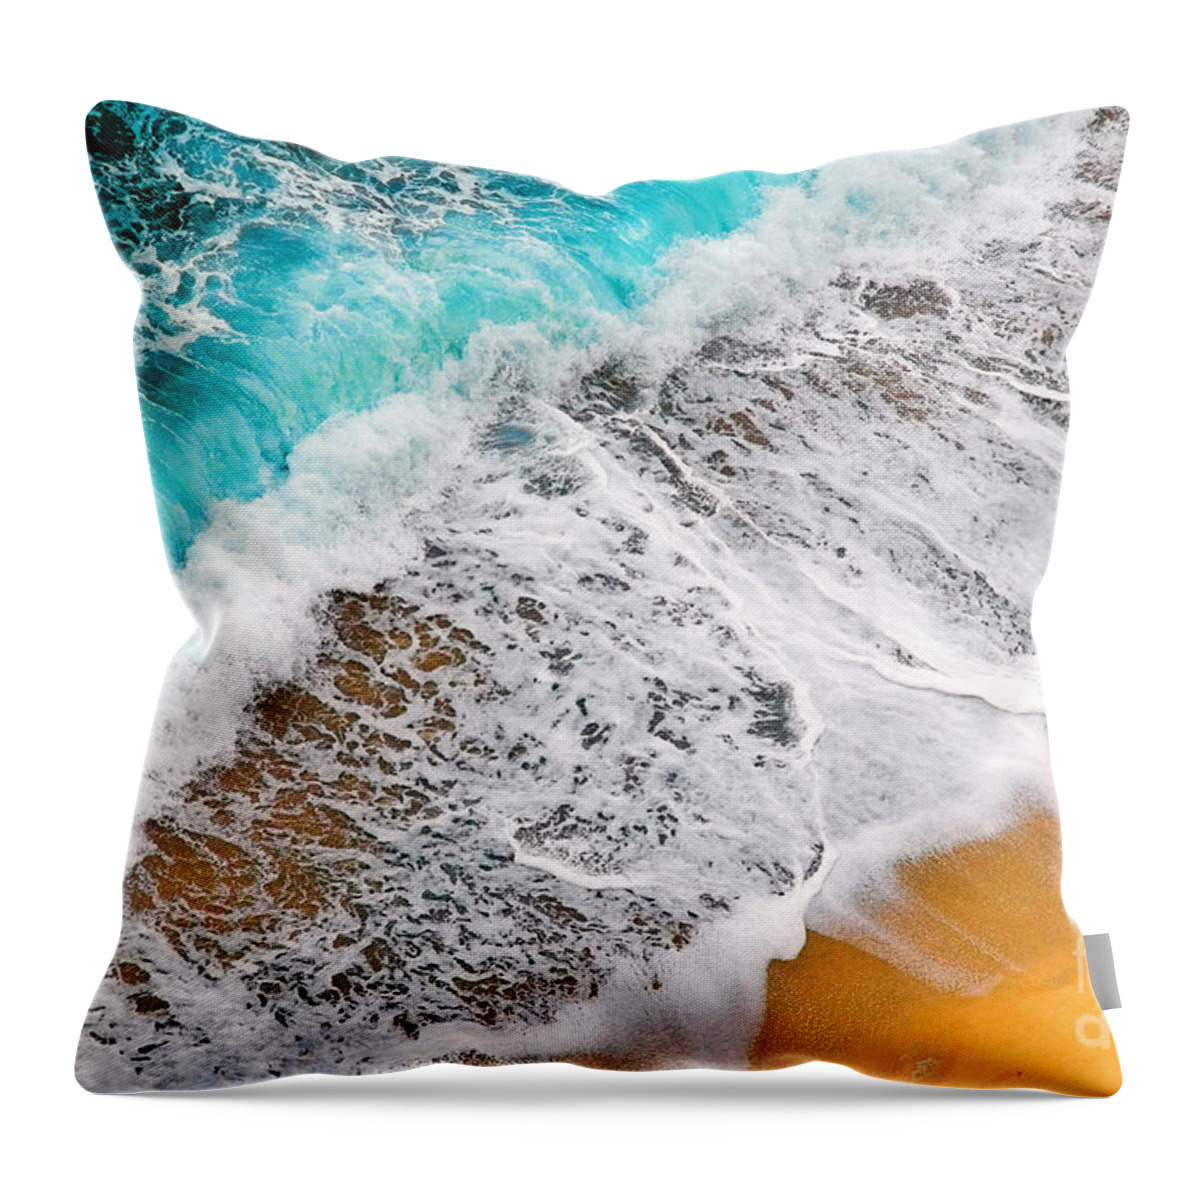 Waves Throw Pillow featuring the photograph Waves abstract by Silvia Ganora